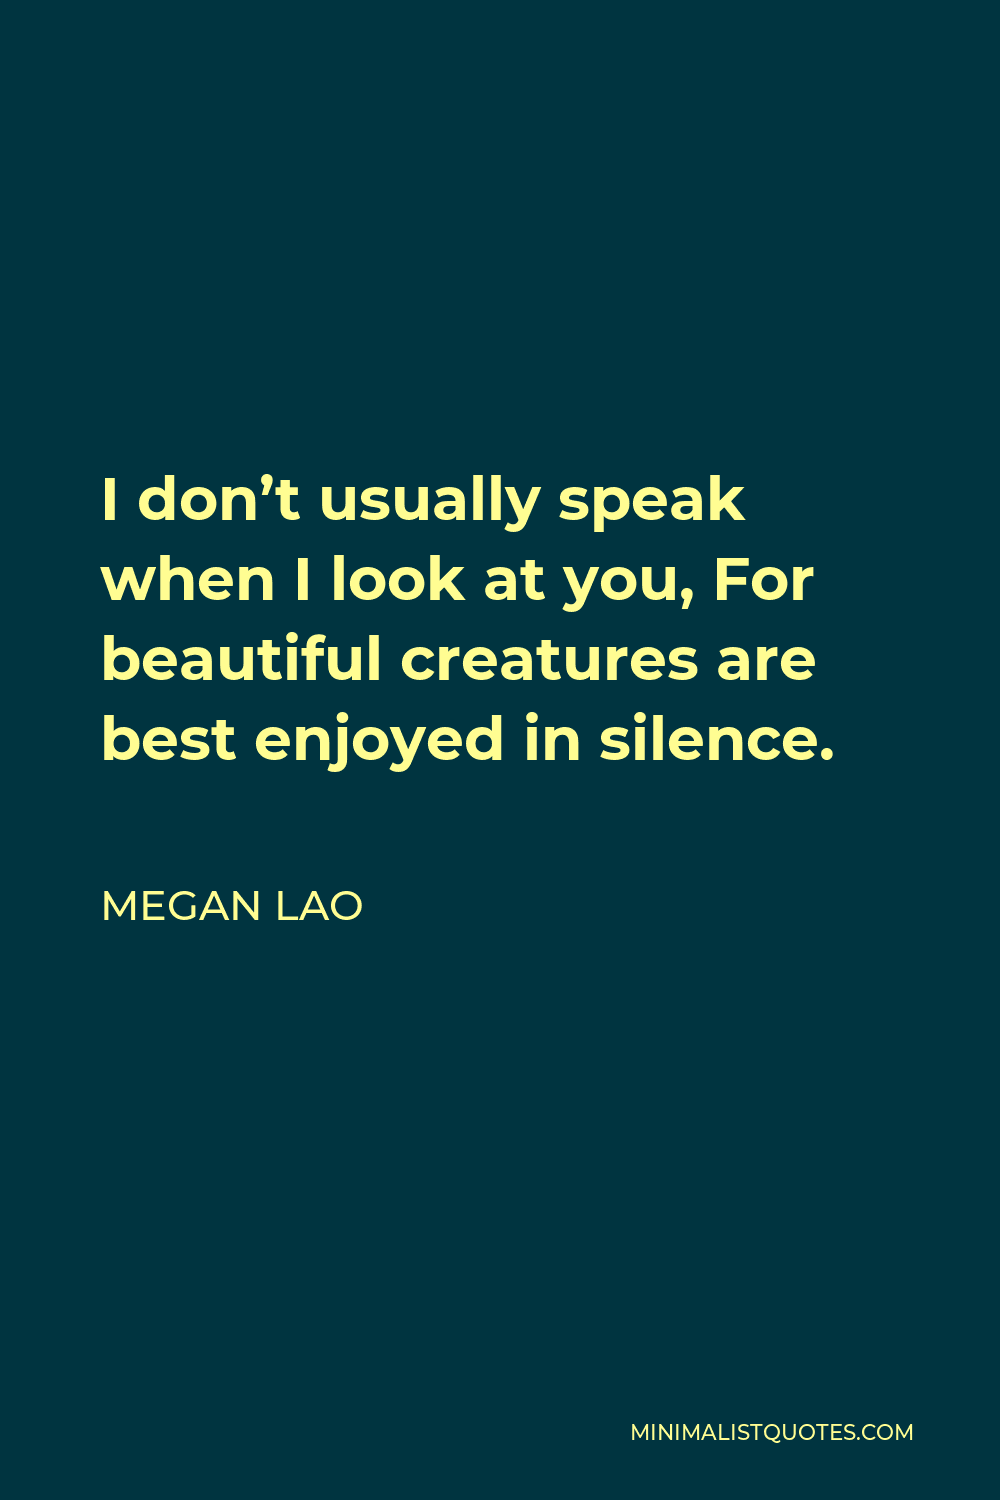 Megan Lao Quote - I don’t usually speak when I look at you, For beautiful creatures are best enjoyed in silence.